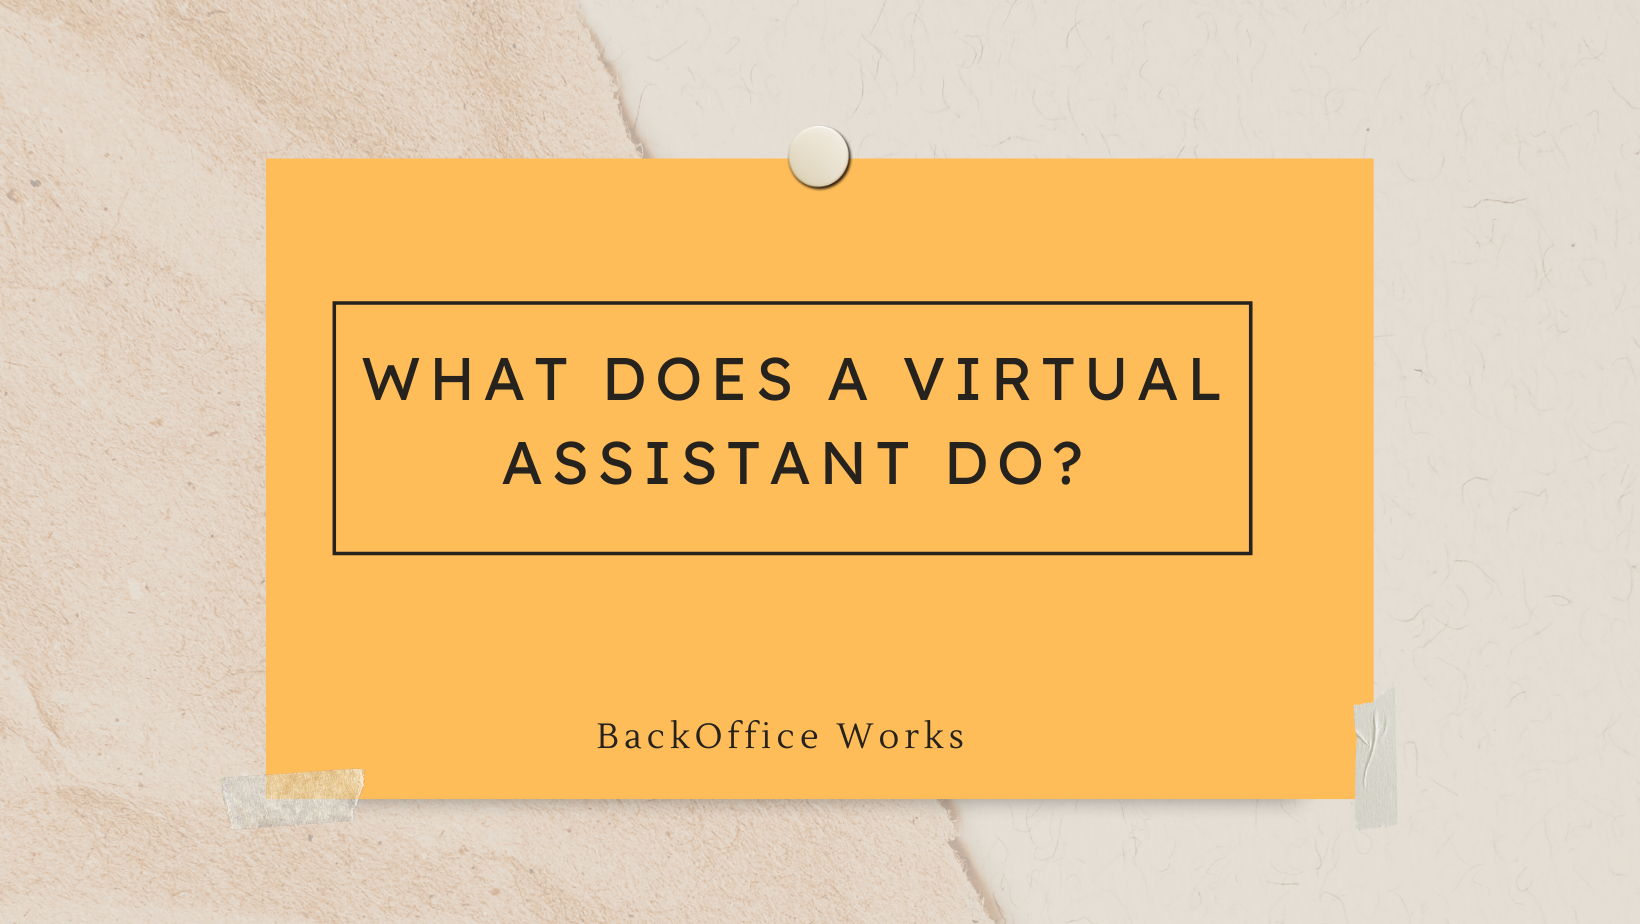 What does a Virtual Assistant do?